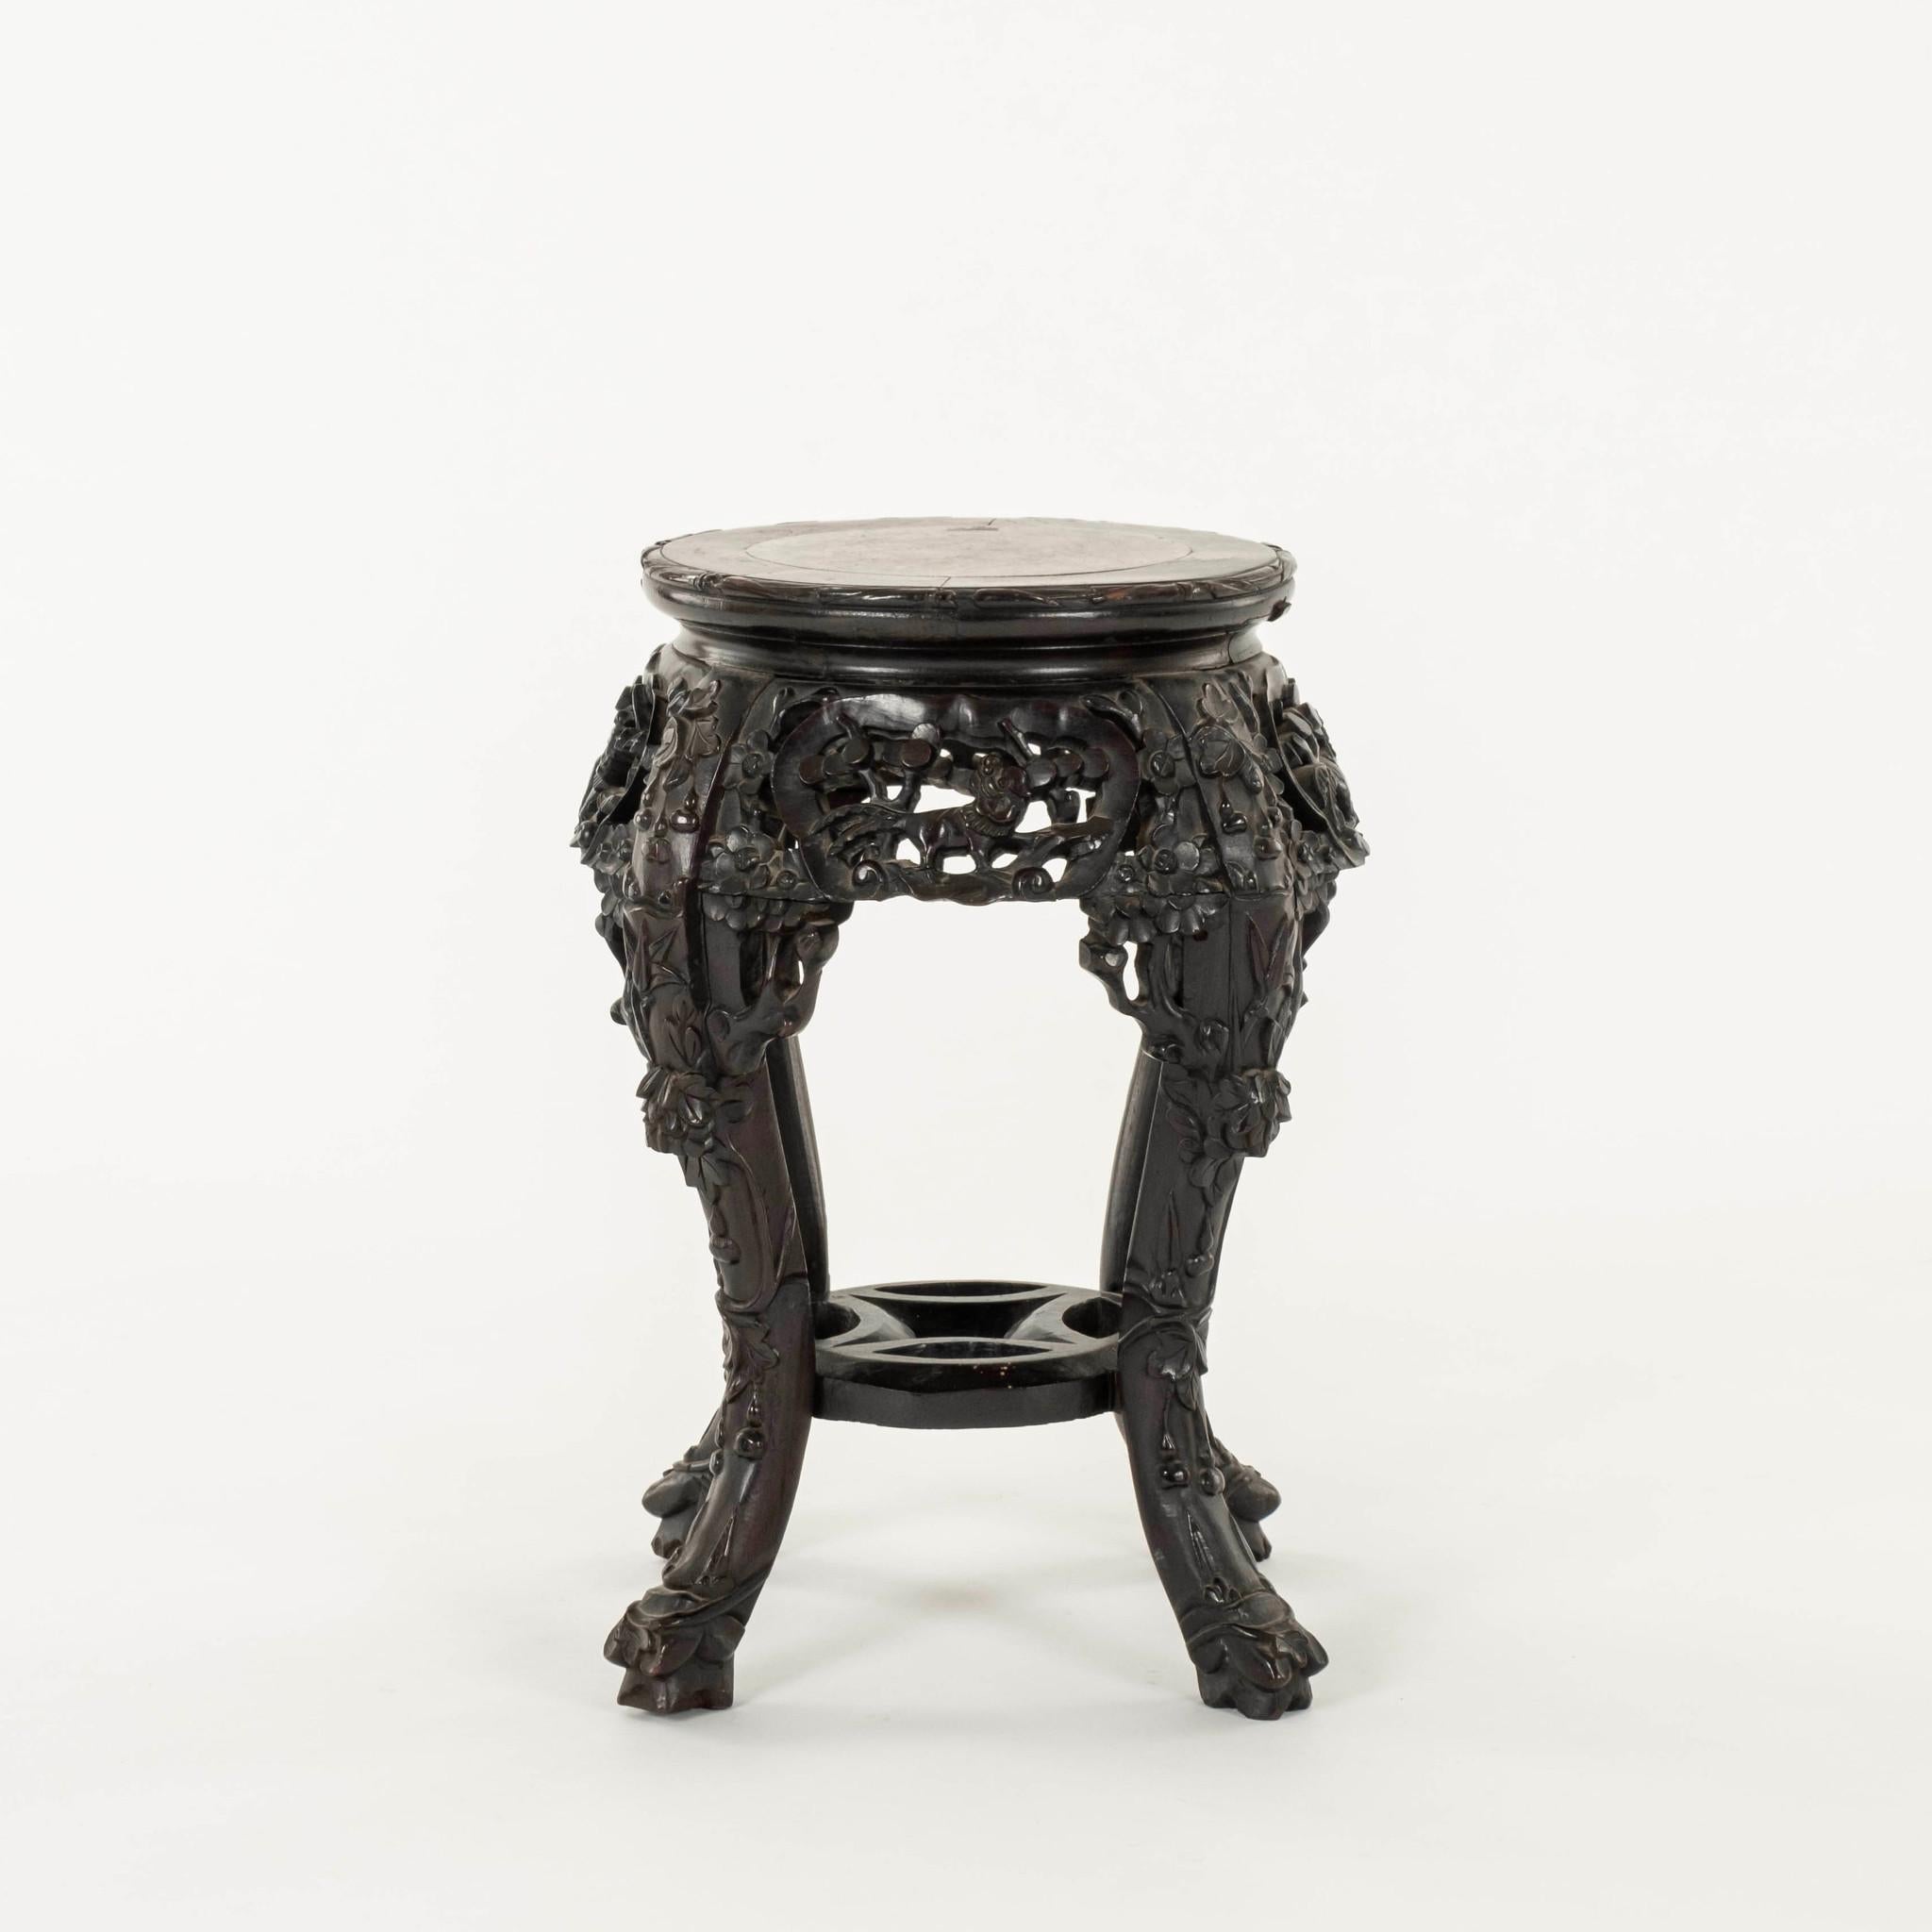 19th Century rosewood side table with marble top and heavily carved cherry blossoms.